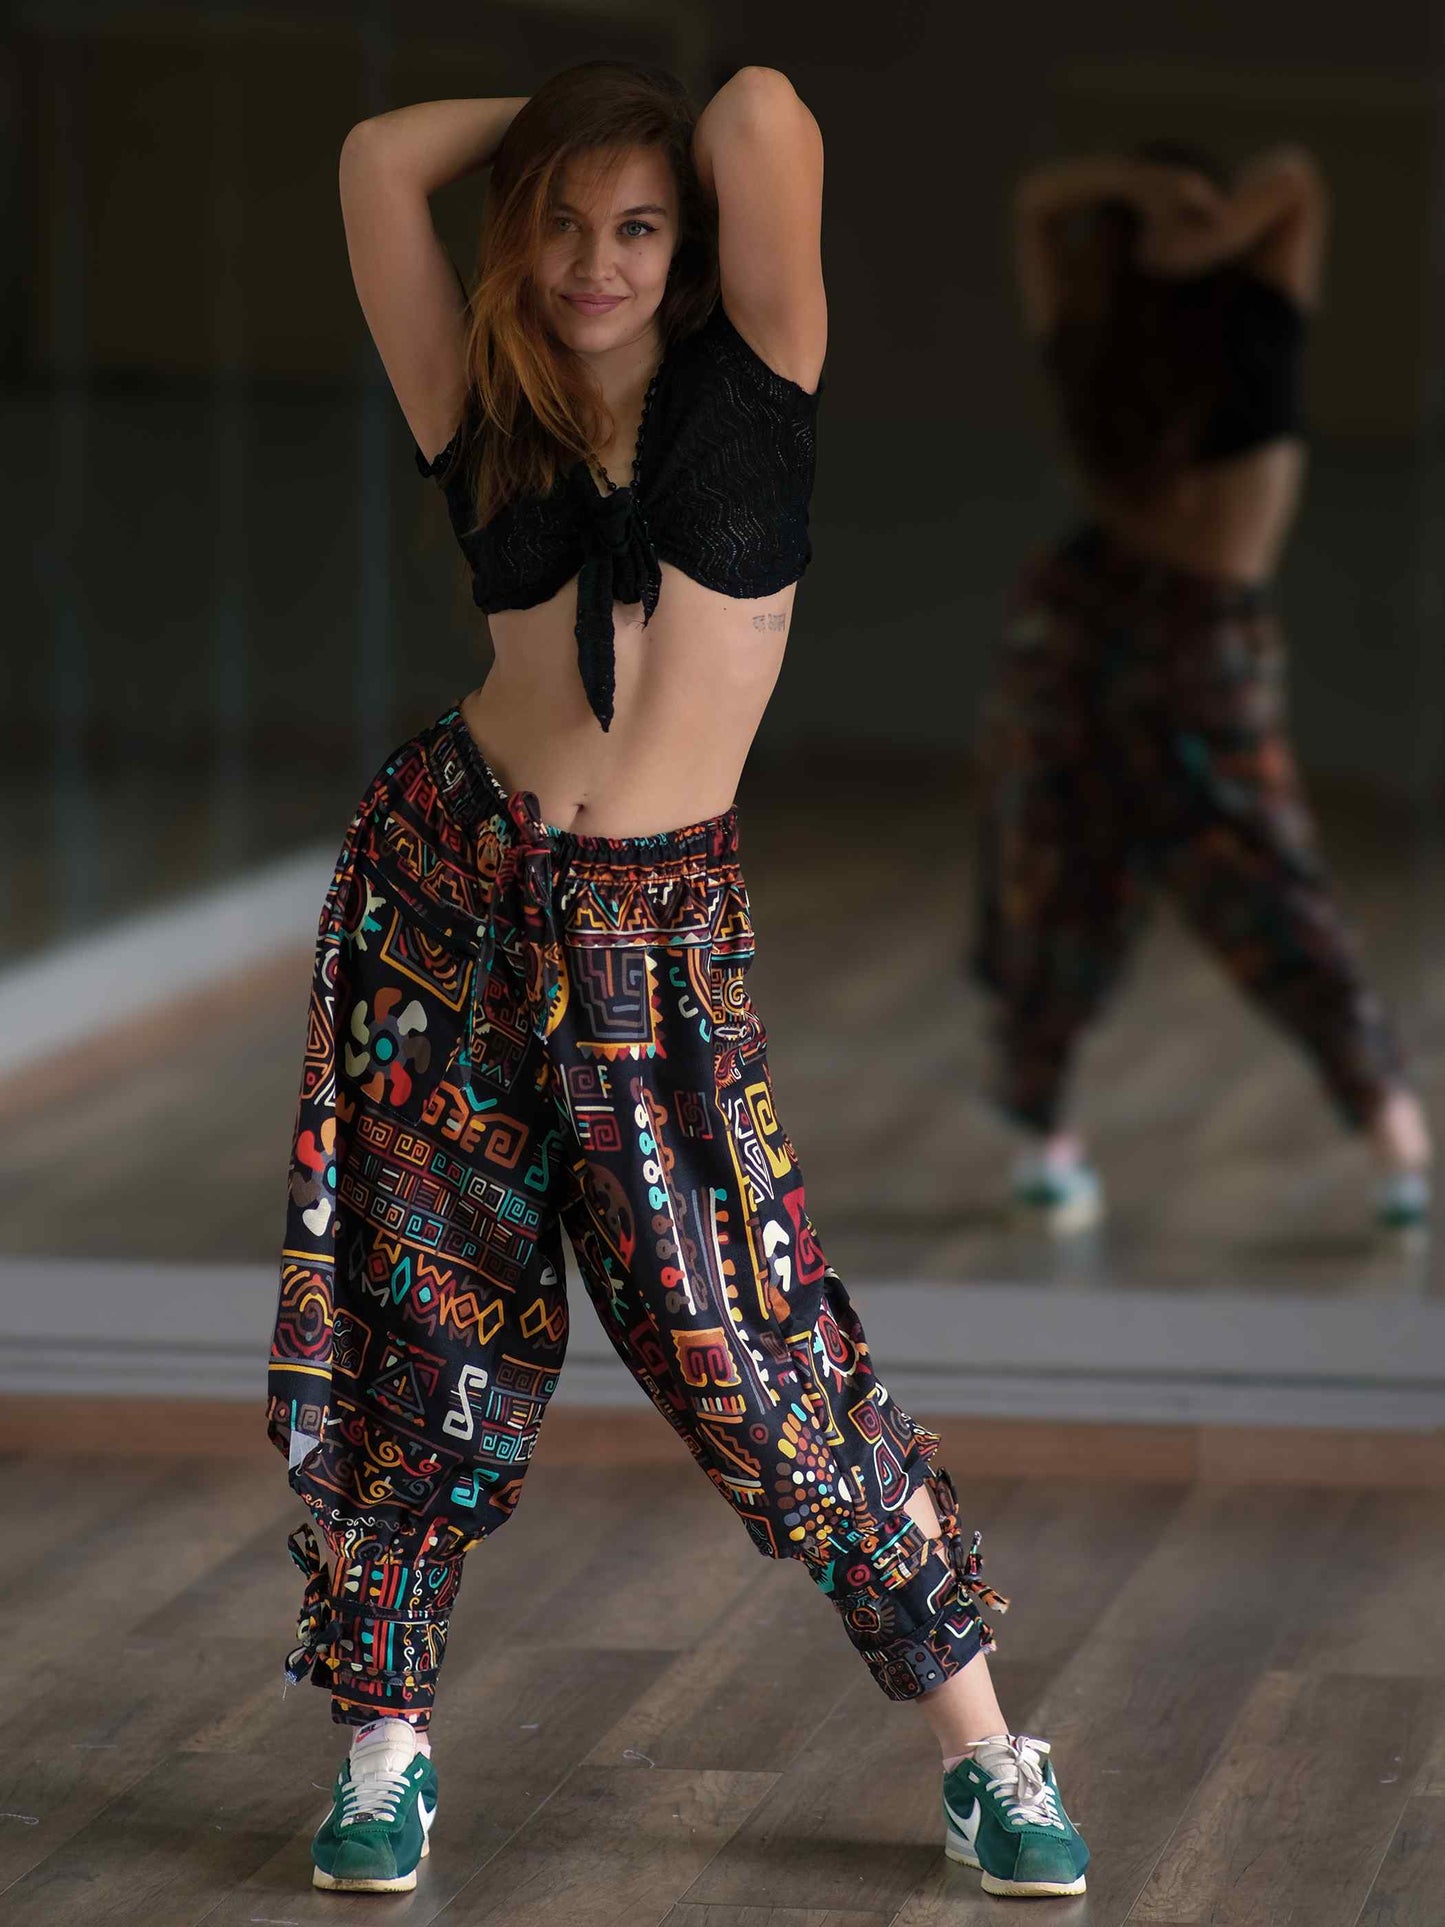 Women's Abstract Graphic Vintage Print Hippy Harem Pants For Dance Yoga